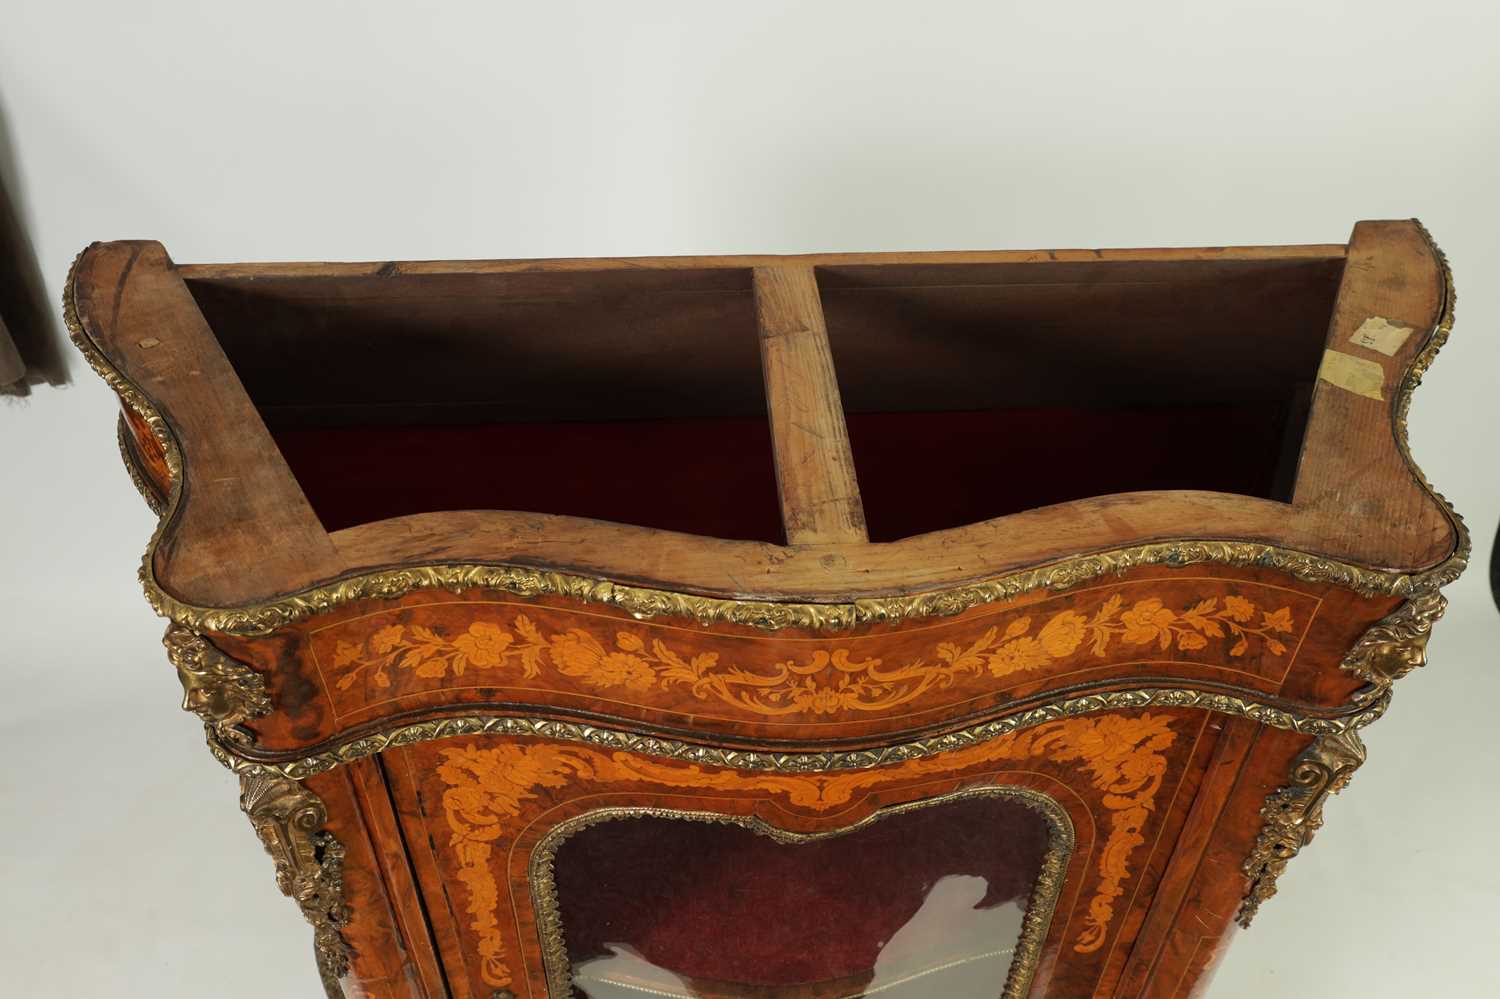 A FINE 19TH CENTURY ORMOLU MOUNTED WALNUT AND FLORAL MARQUETRY INLAID SERPENTINE SIDE CABINET - Image 3 of 16